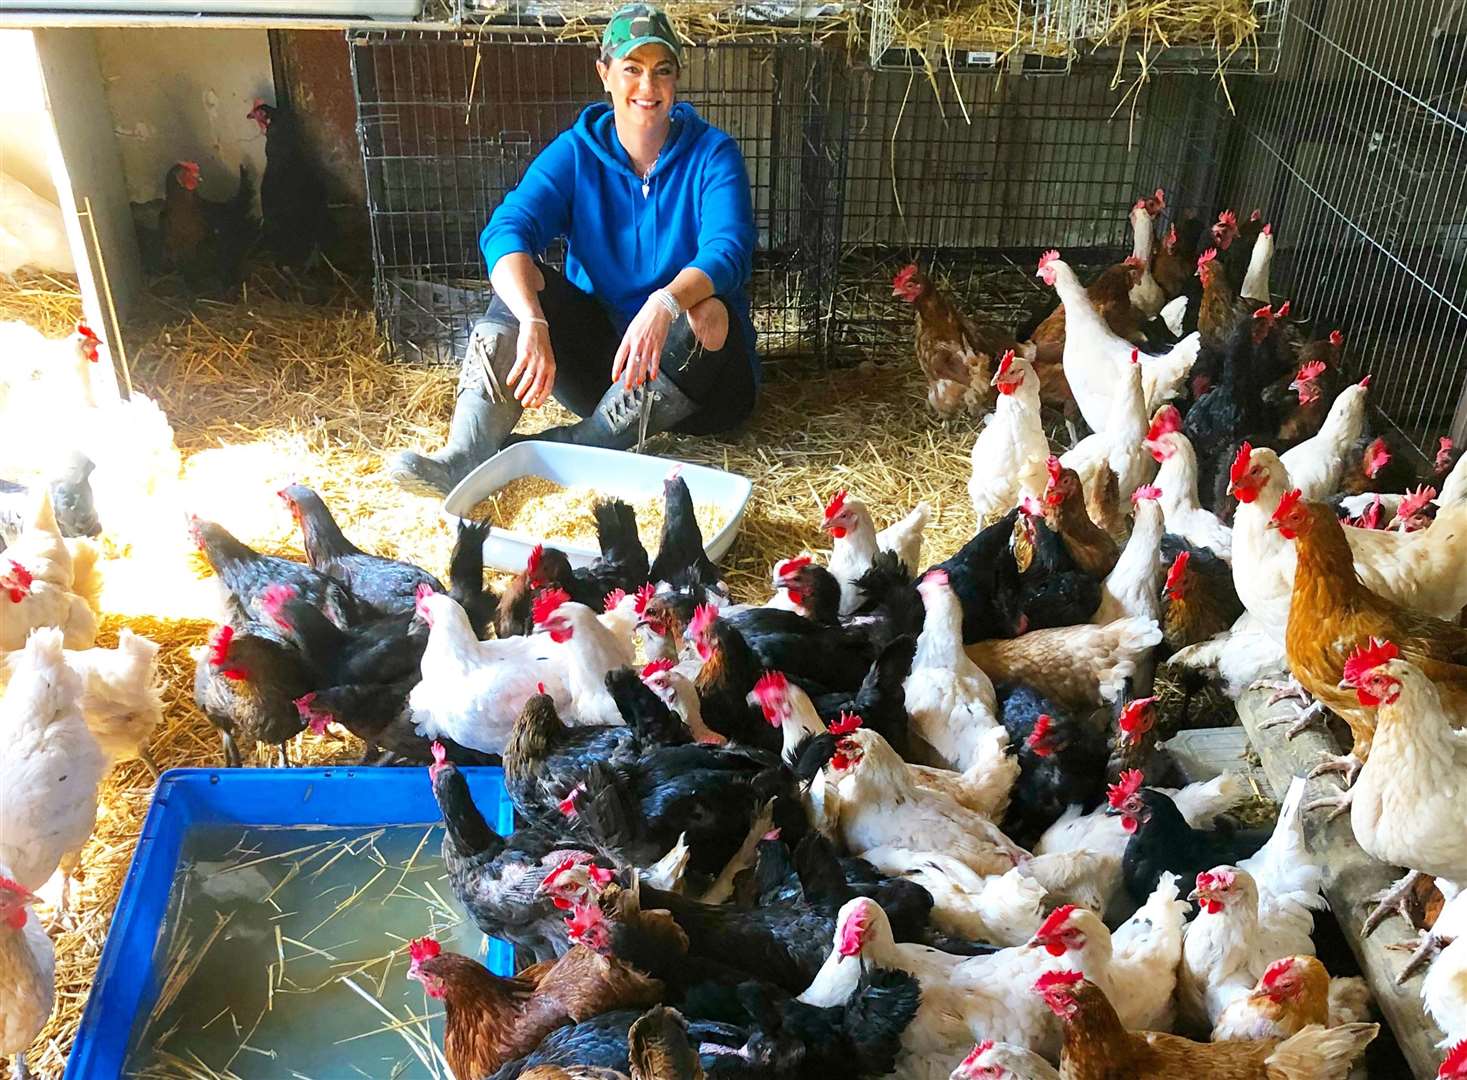 Happy Pants Ranch founder Amey James with dozens of chickens she rescued previously